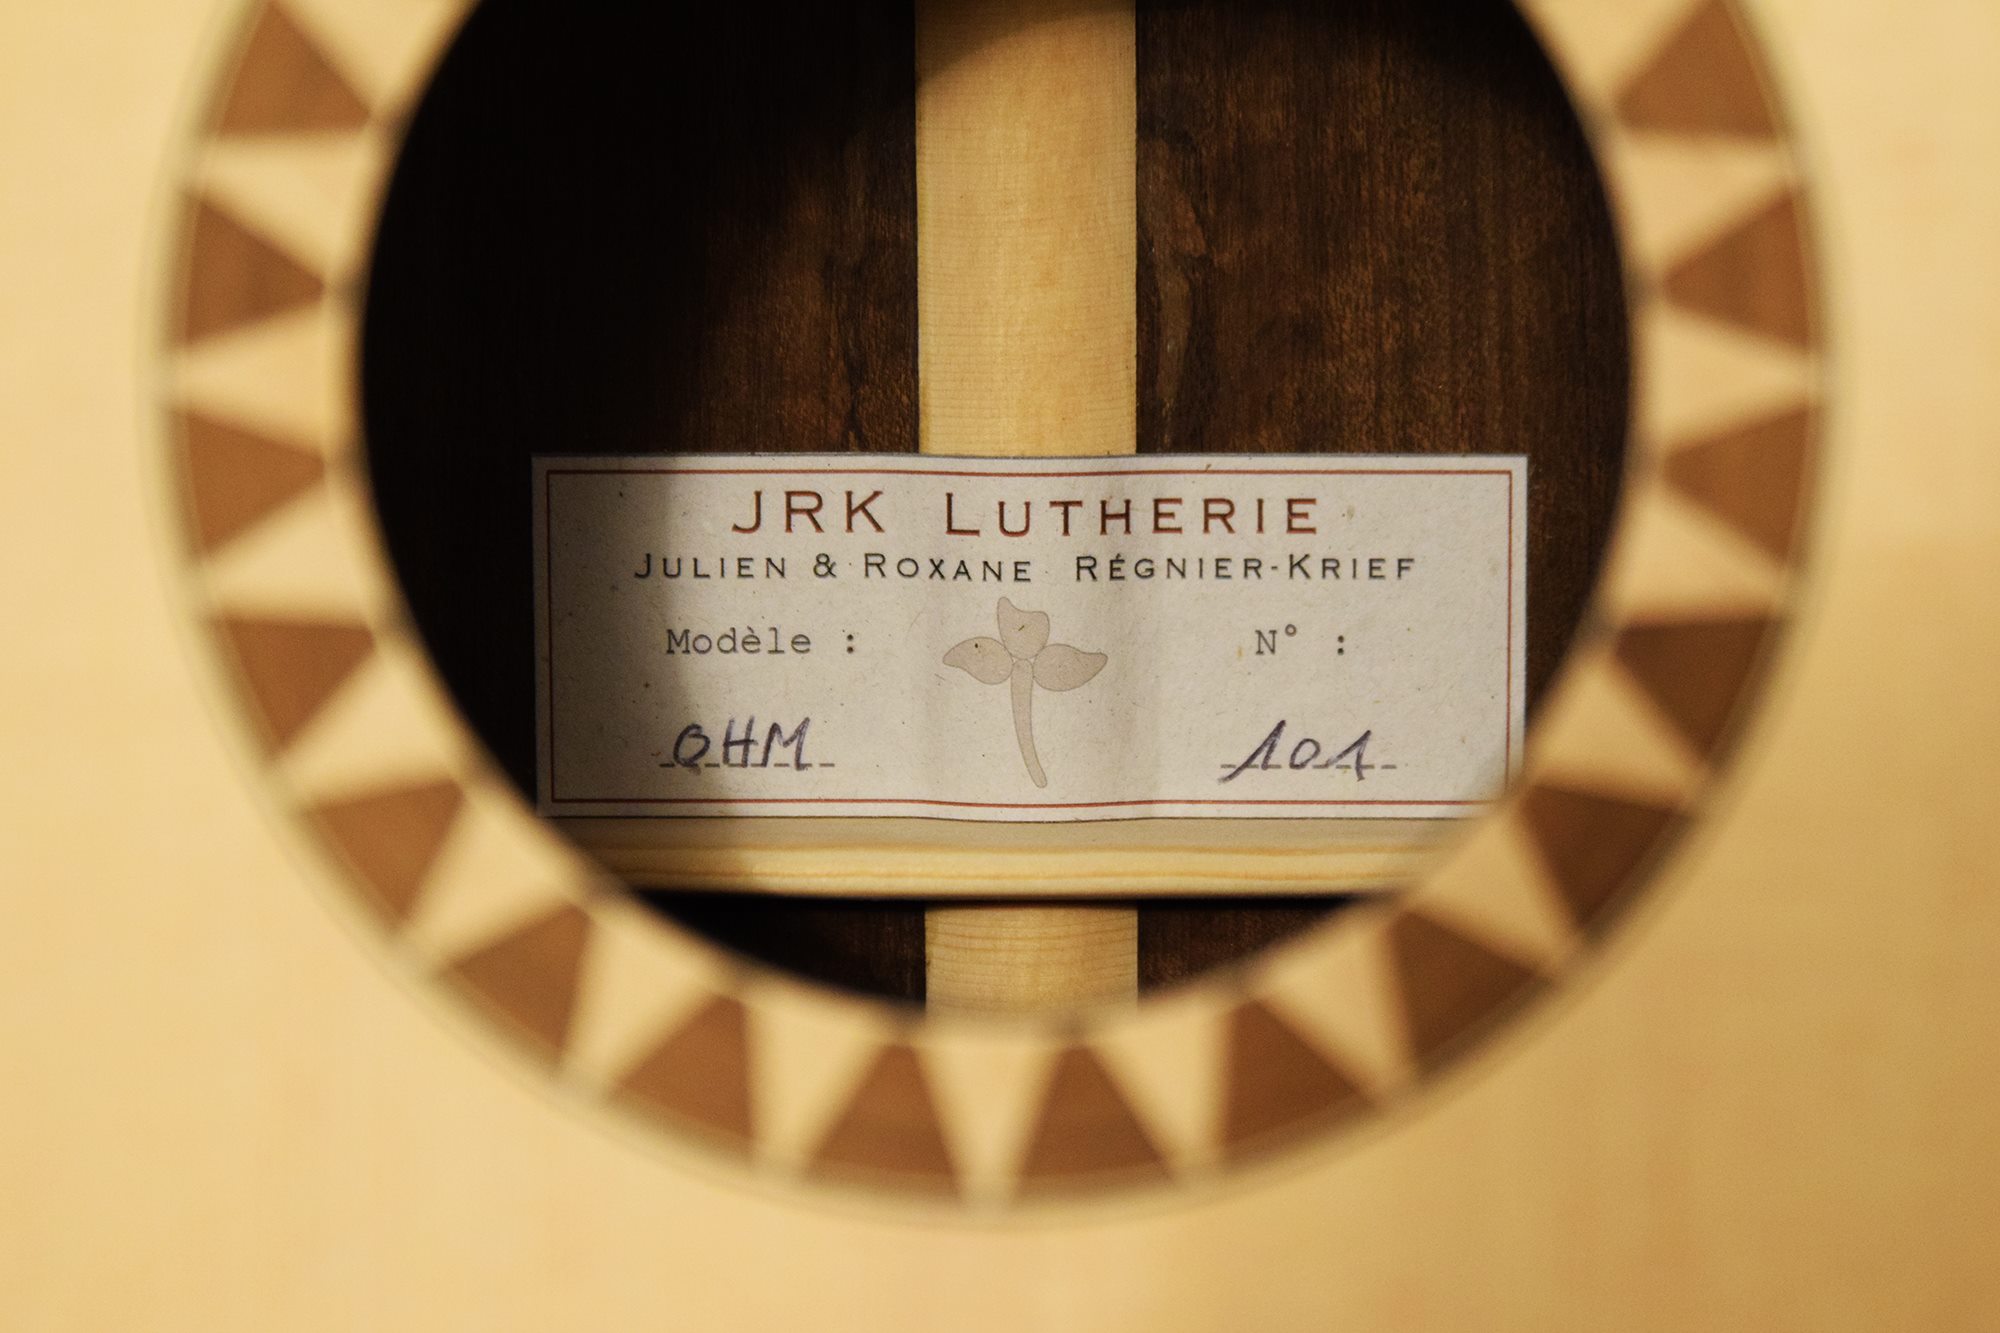 JRK Lutherie